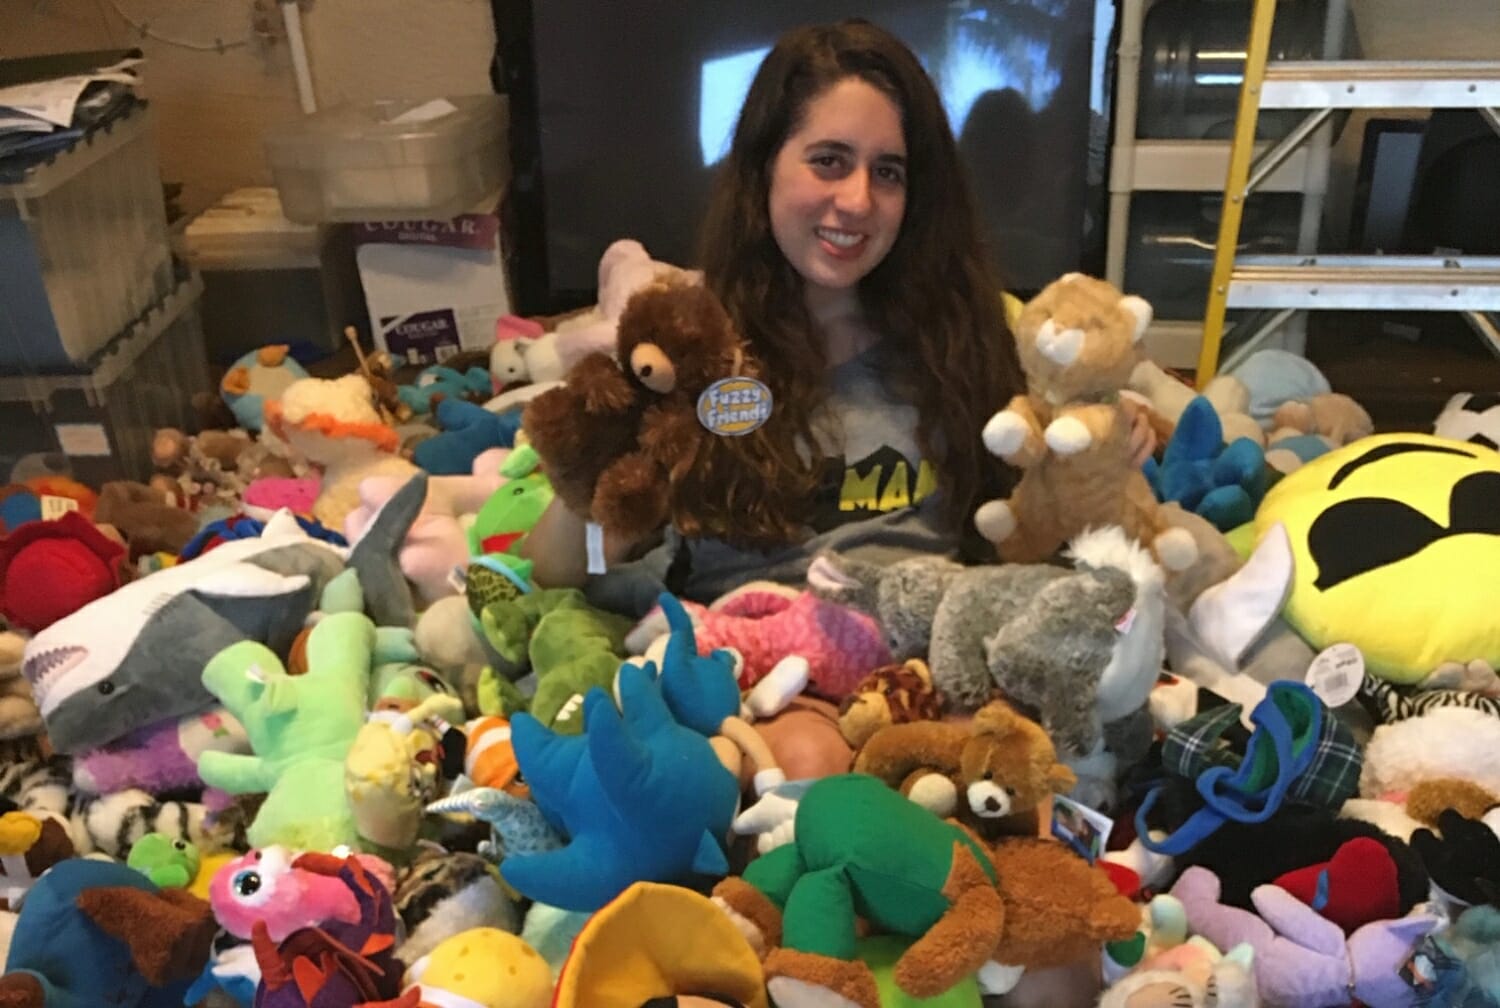 Florida Teen Shares Her Love For Stuffed Animals With Children In Emergencies Points Of Light